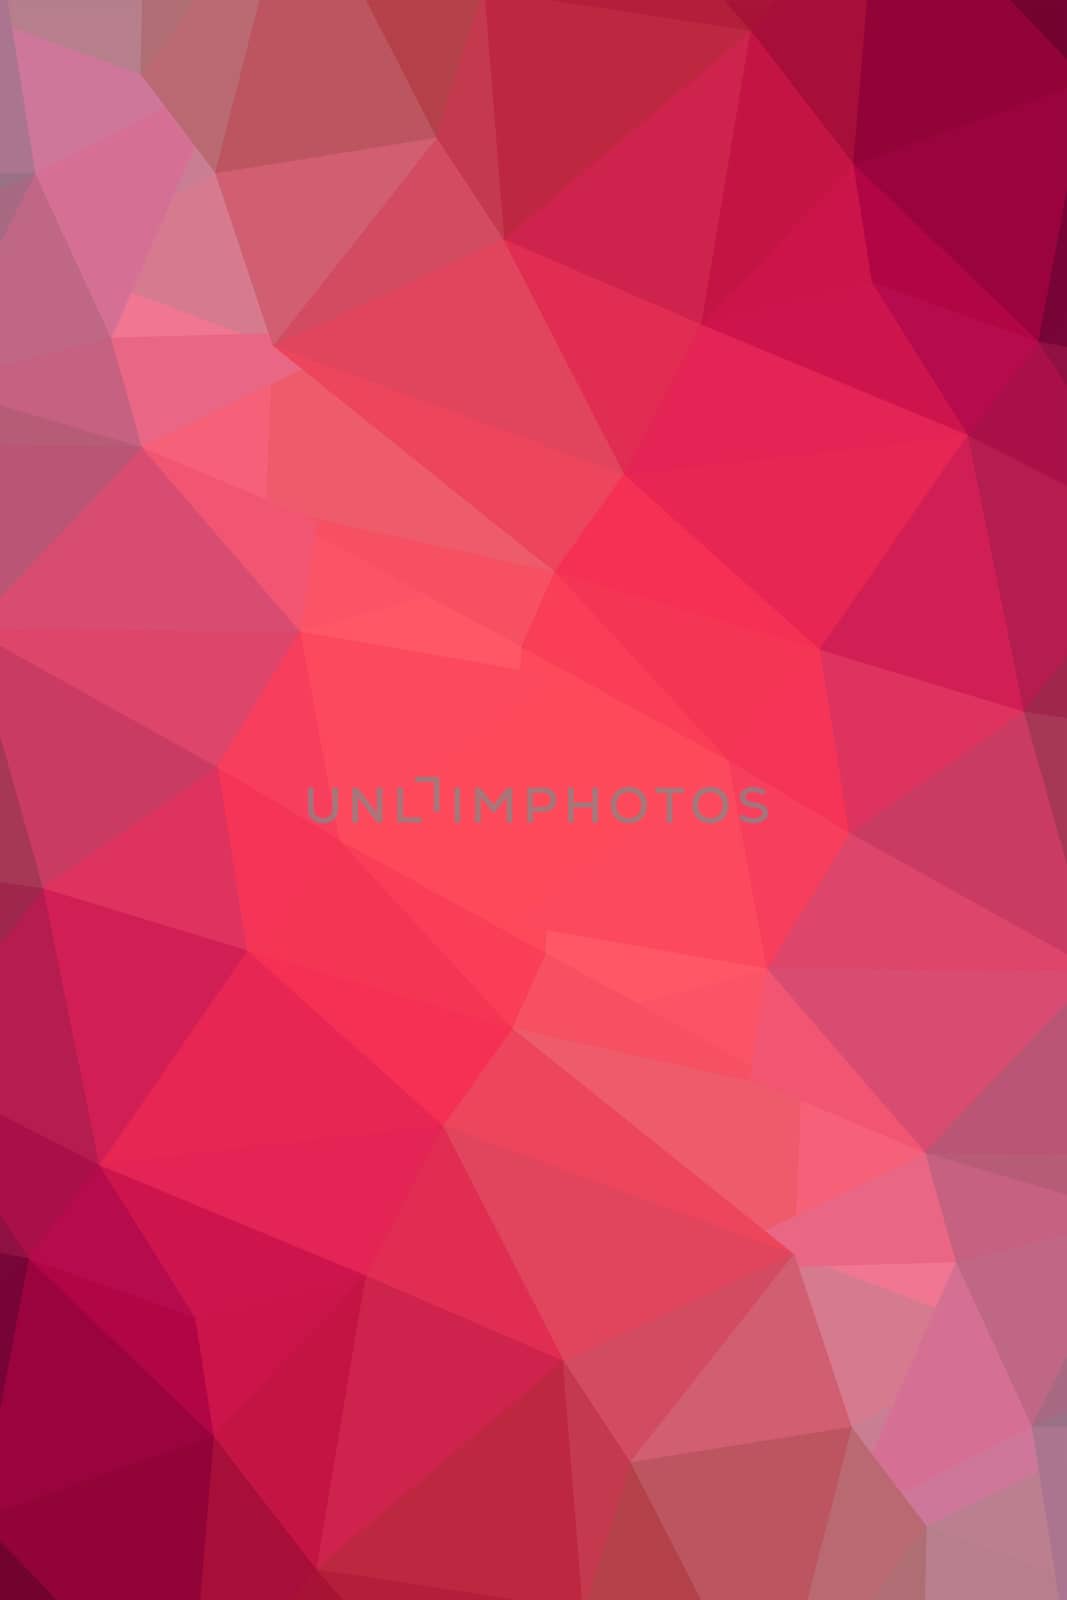 Pink Low Poly Geometric Abstract Background